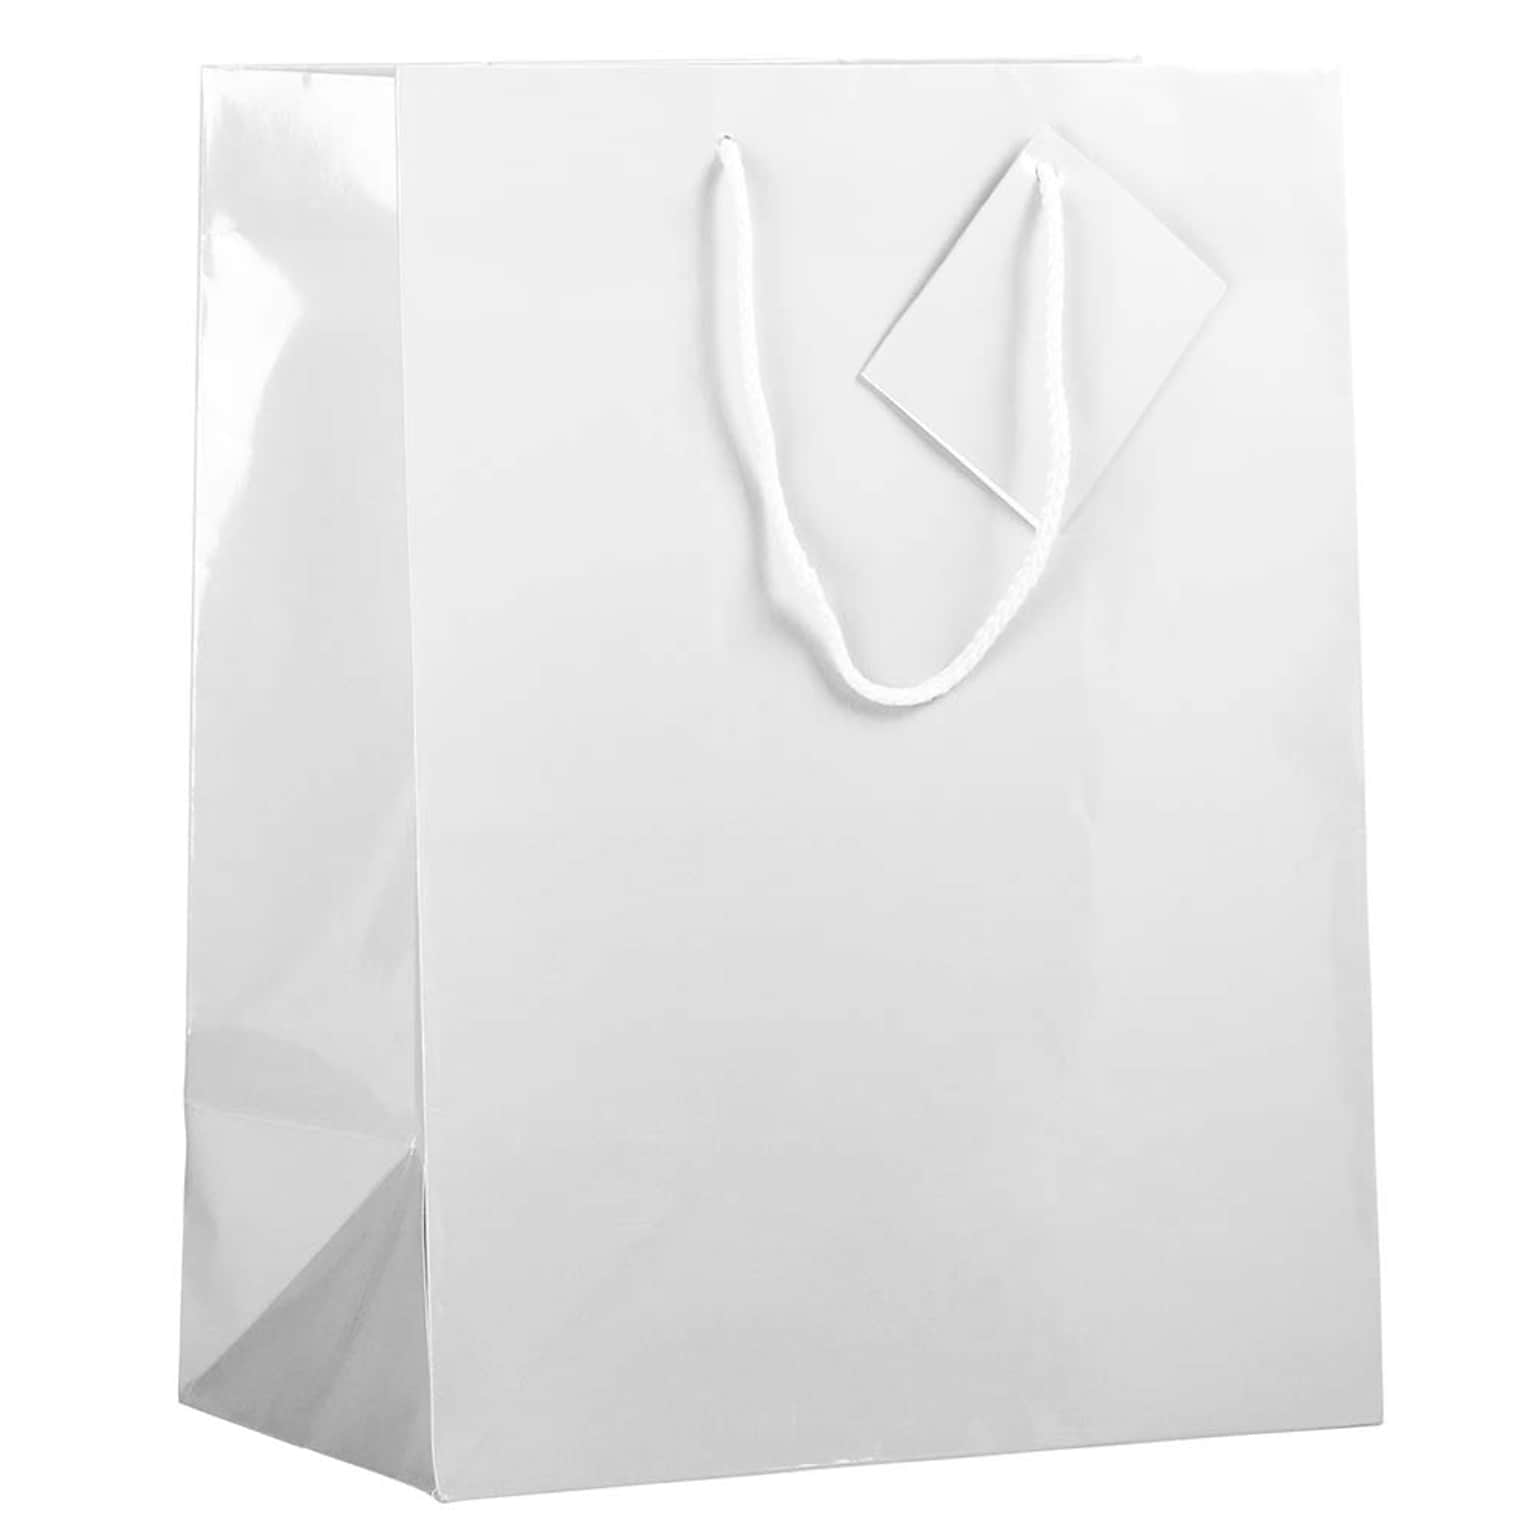 JAM PAPER Glossy Gift Bags with Rope Handles, Large, 10 x 13, White, 3 Bags/Pack (673GLWHB)